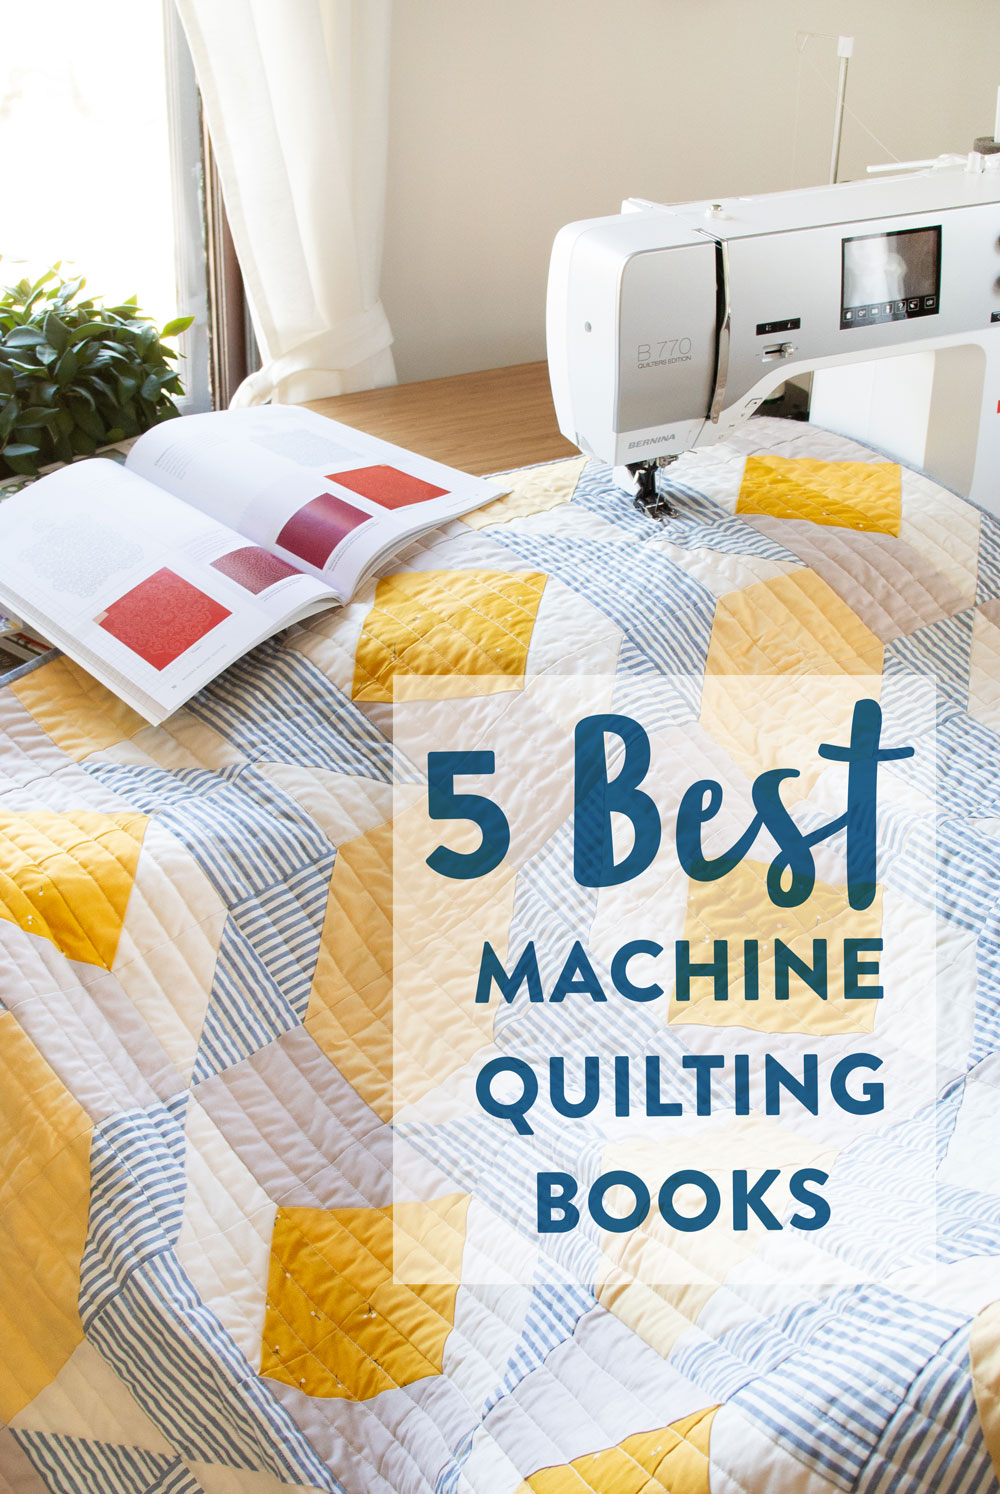 The perfect list of the best books on machine quilting. | Suzy Quilts https://suzyquilts.com/5-best-machine-quilting-books